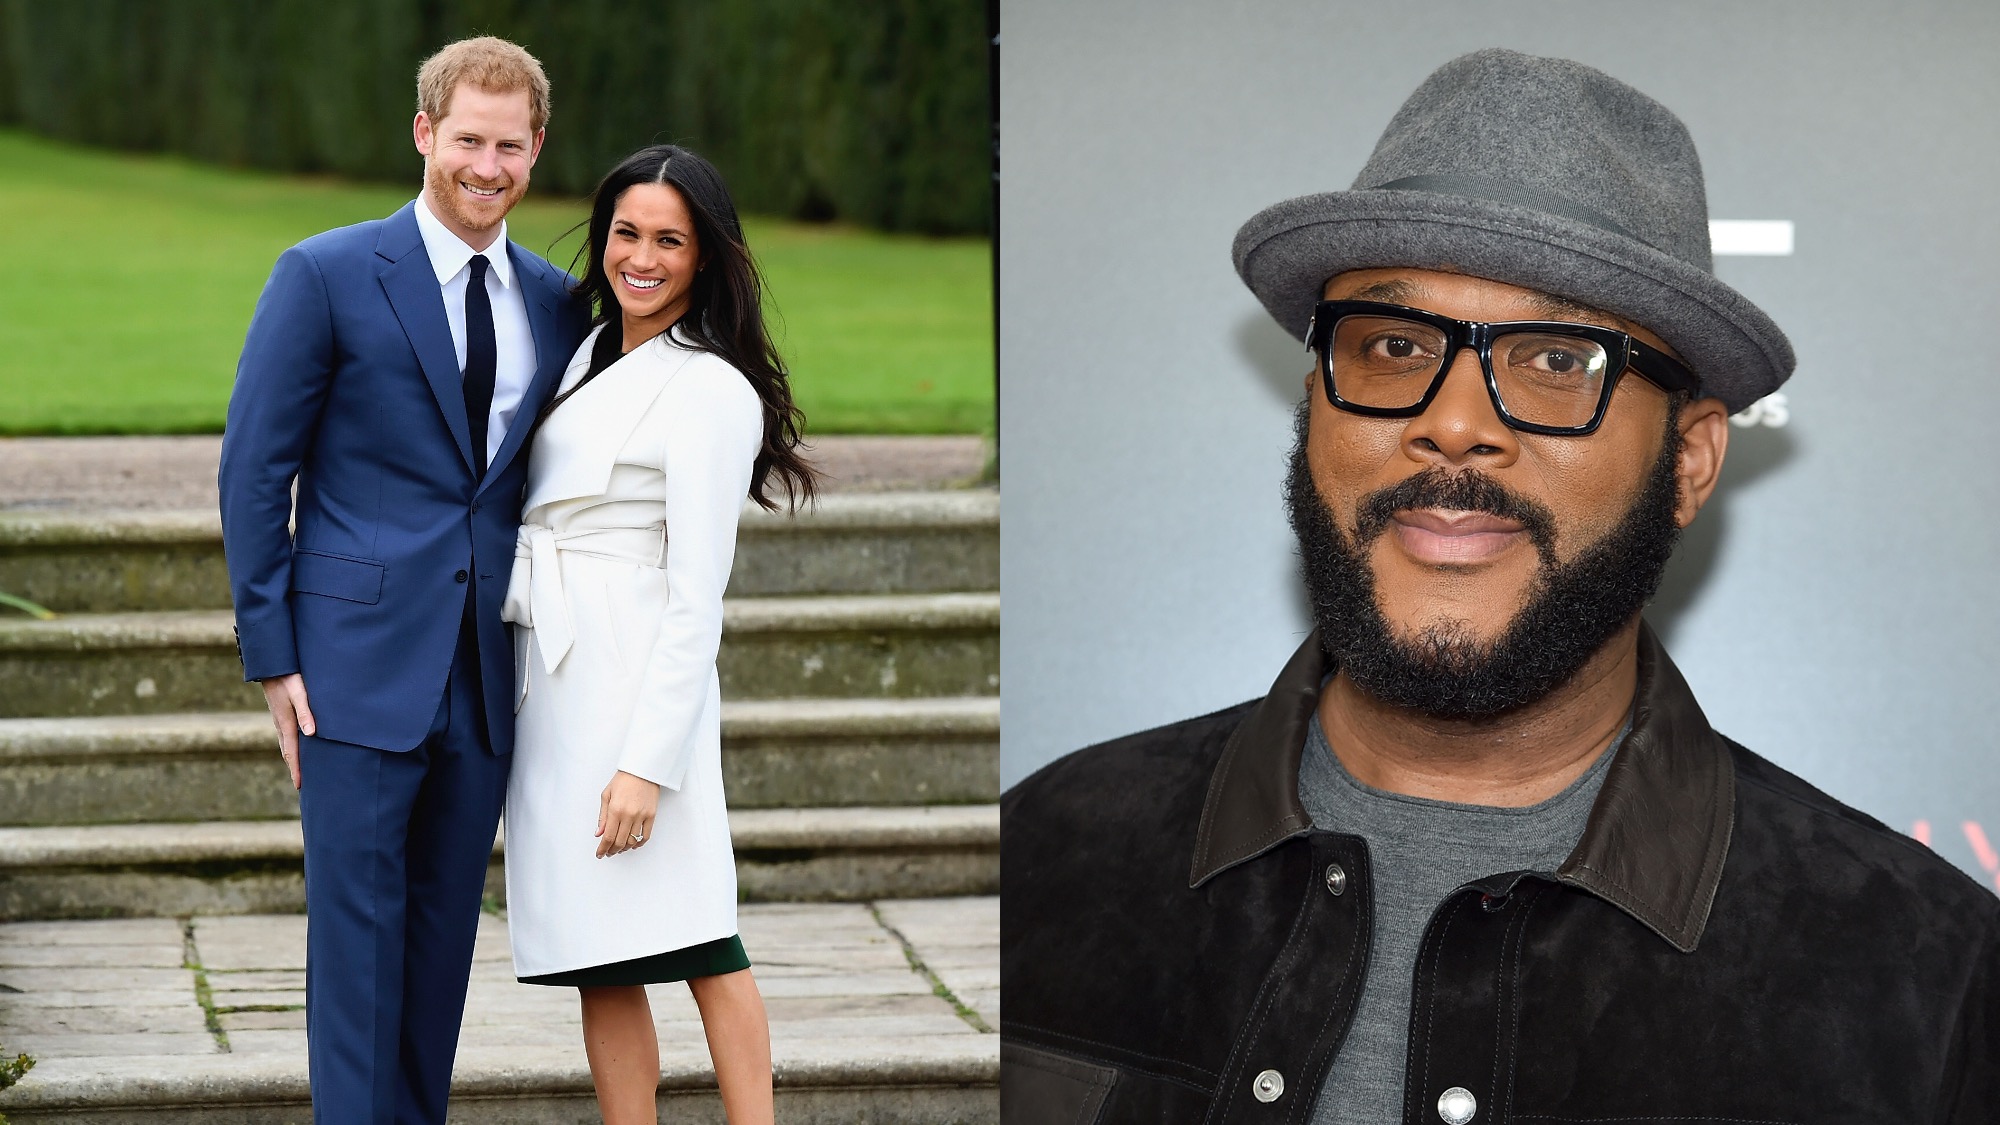 (L) Prince Harry and Meghan Markle pose for an official engagement photo in 2017. (R) Tyler Perry attends the "Acrimony" New York Premiere on March 27, 2018.